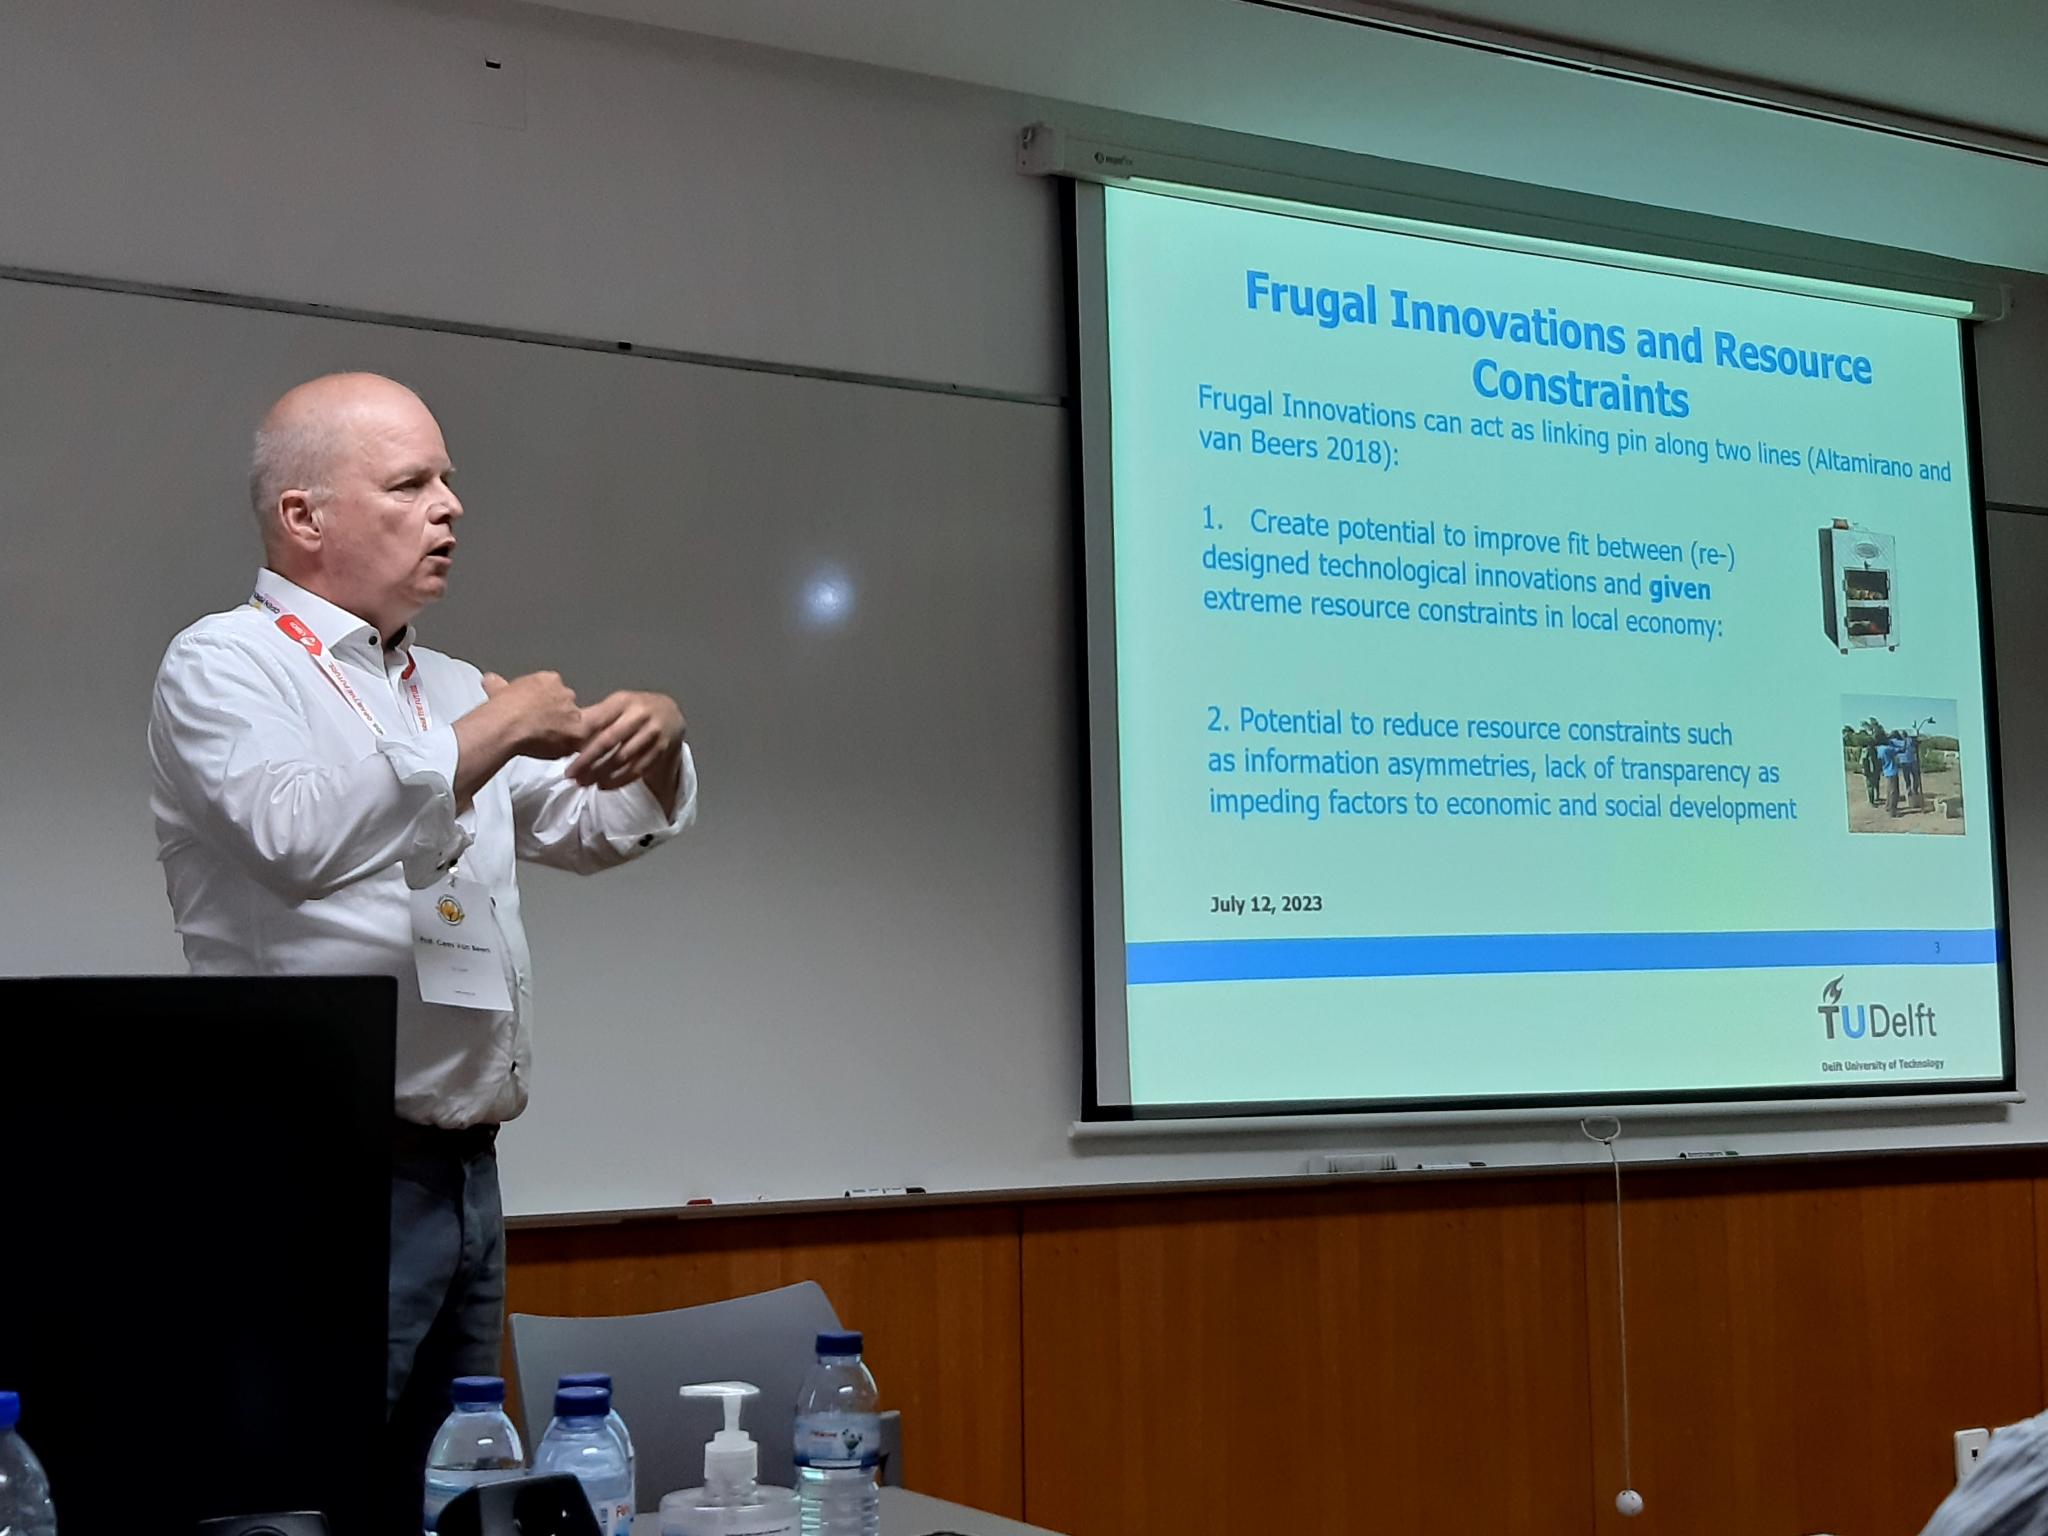 Cees van Beers presenting "Frugal Innovations in Infrastructure Systems and Institutions: The Case of Digitalisation"